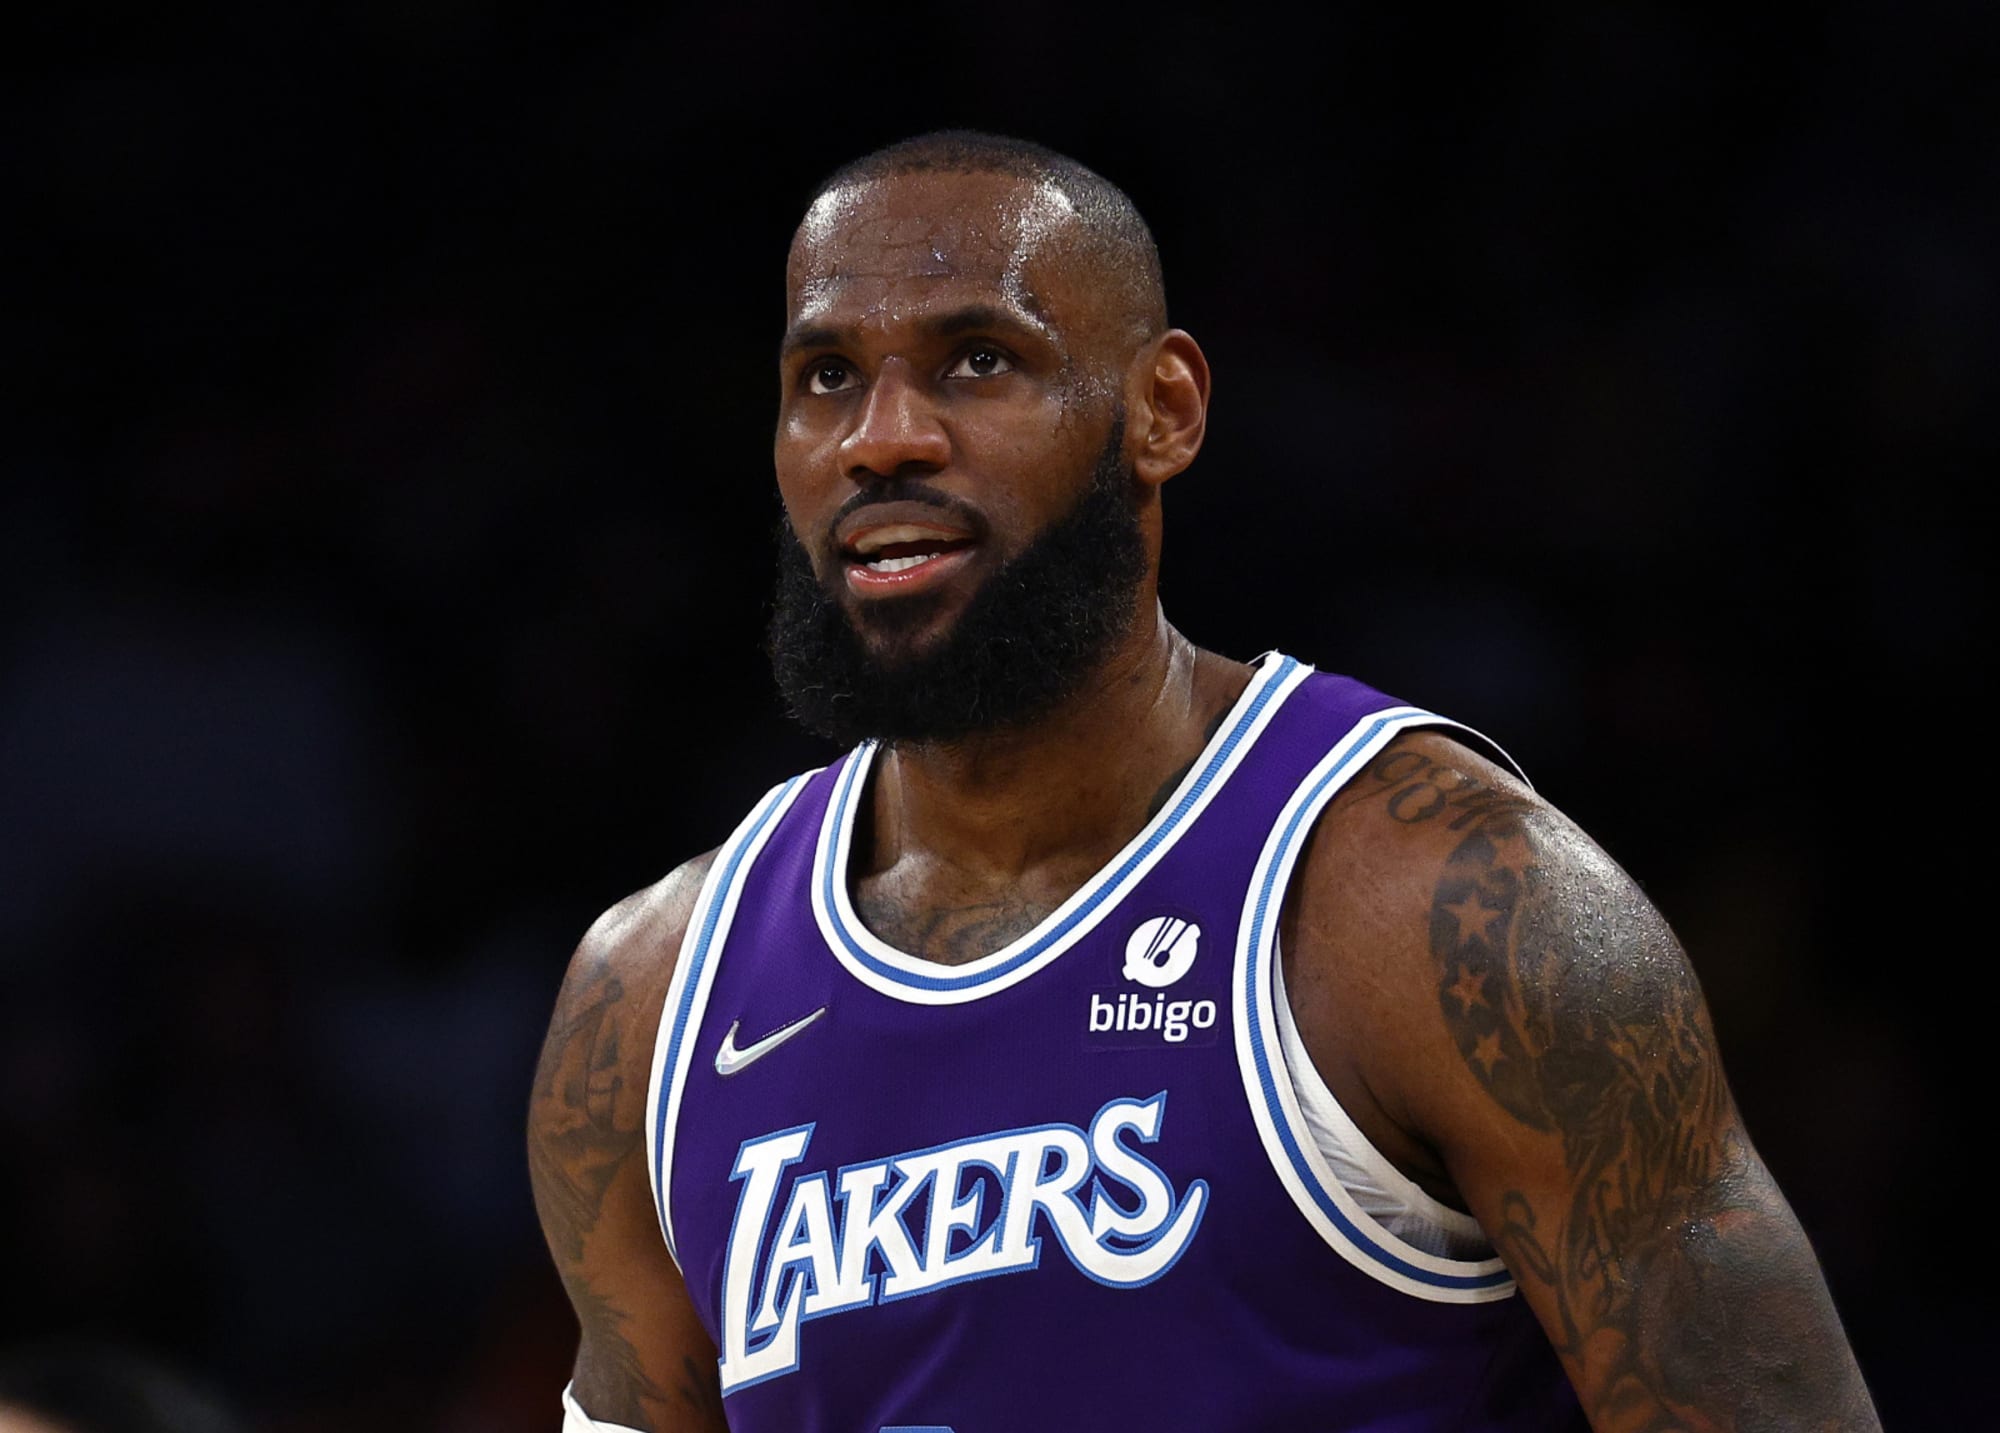 Lakers News: How Pundit Thinks LeBron James' Age Will Affect Play